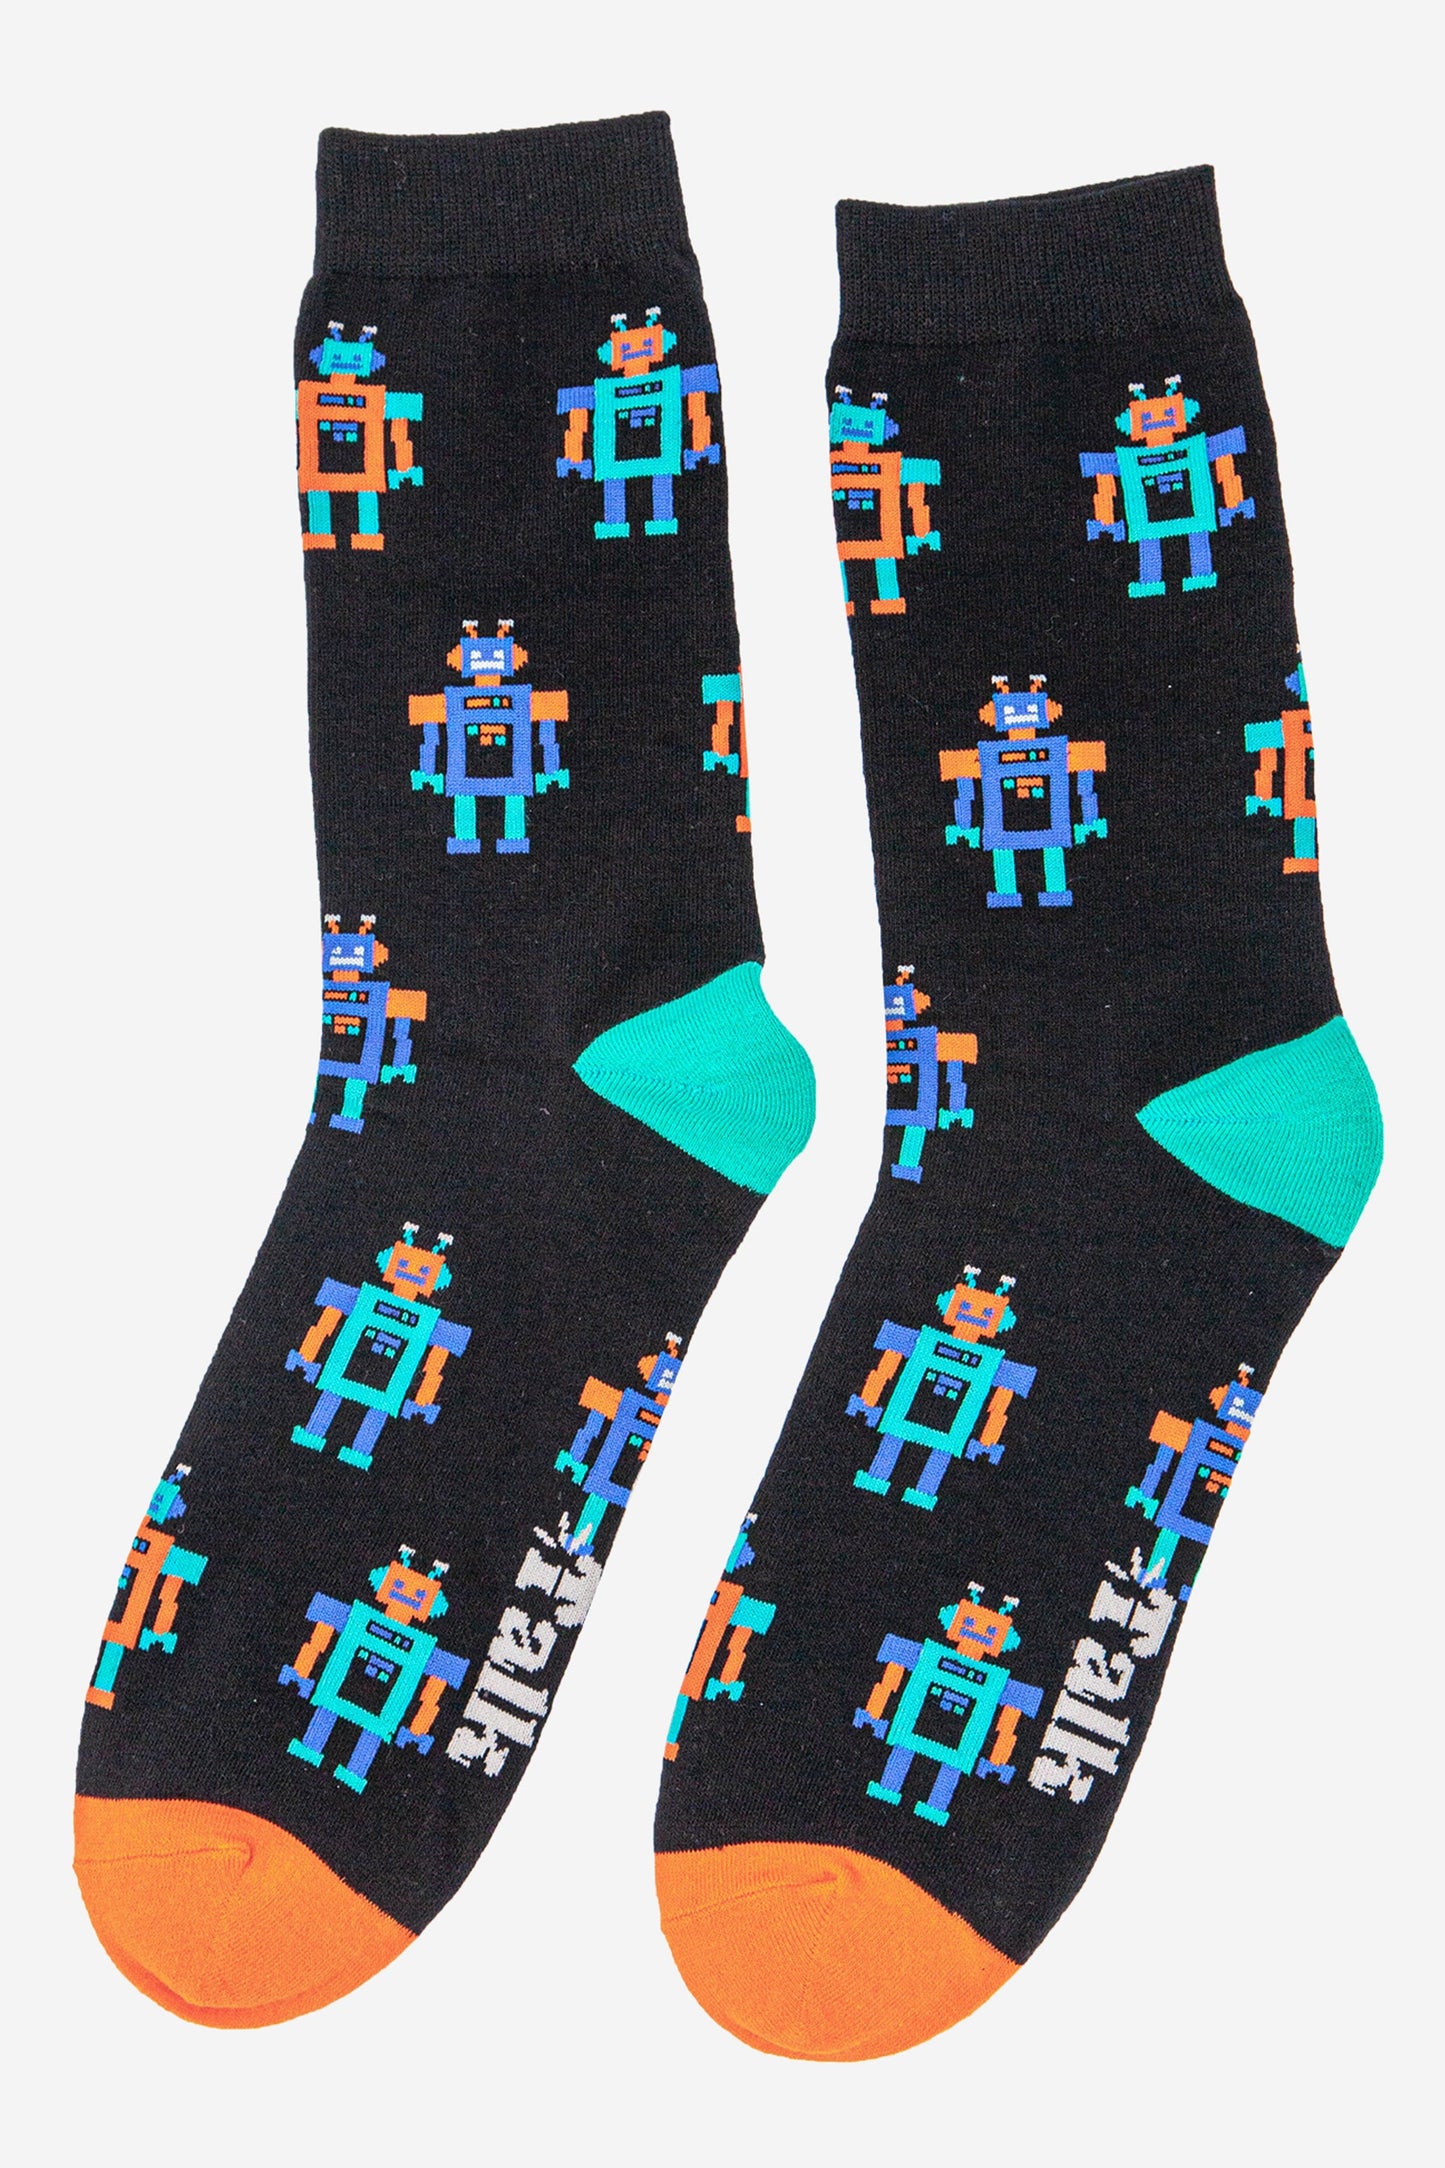 black vintage robot pattern novelty bamboo socks with an all over pattern of blue and orange cartoon robots